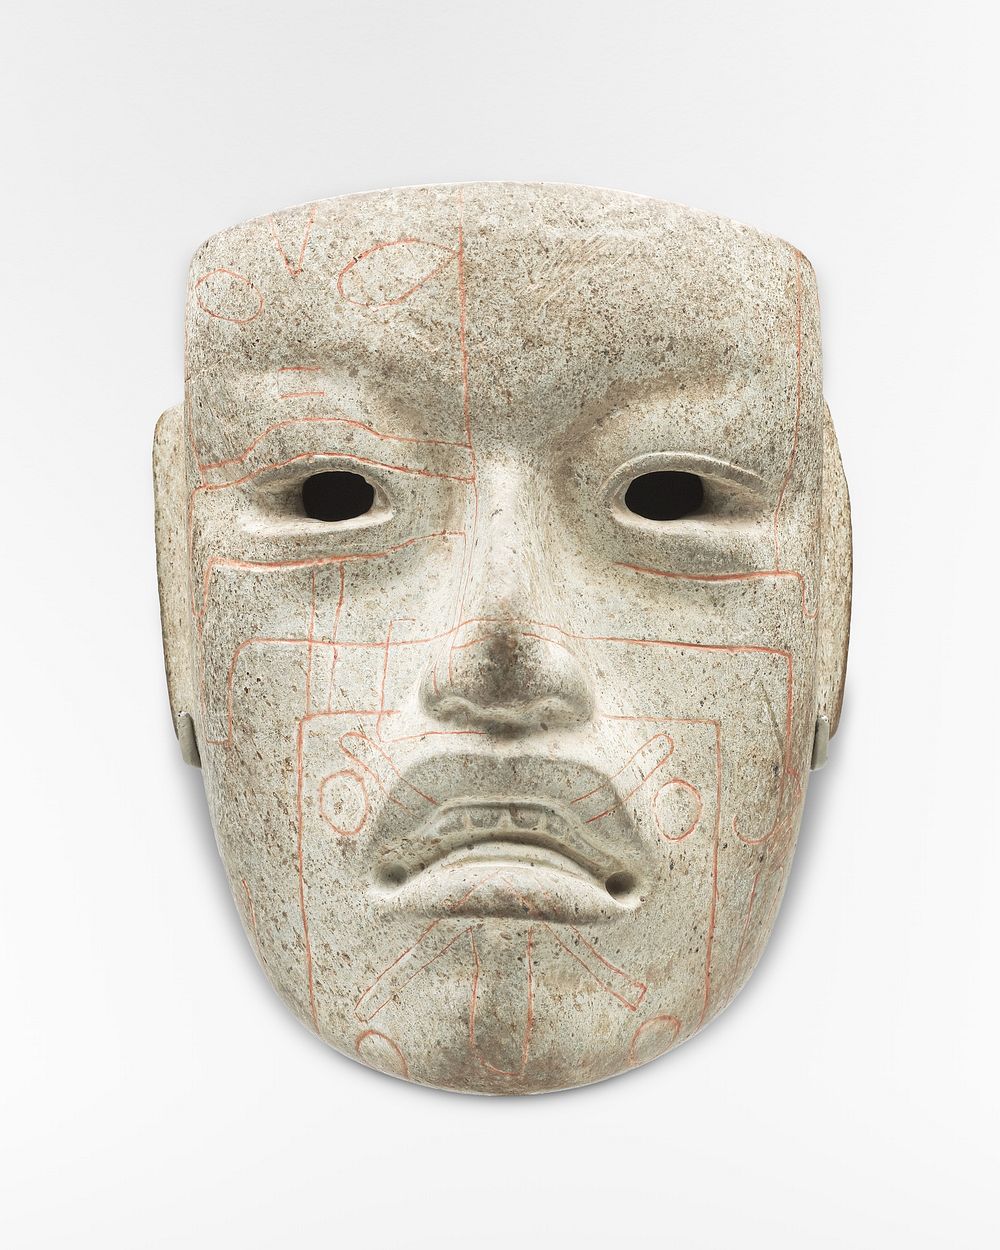 Mask (900-300 BCE) sculpture by Olmec. Original public domain image from The Minneapolis Institute of Art. Digitally…